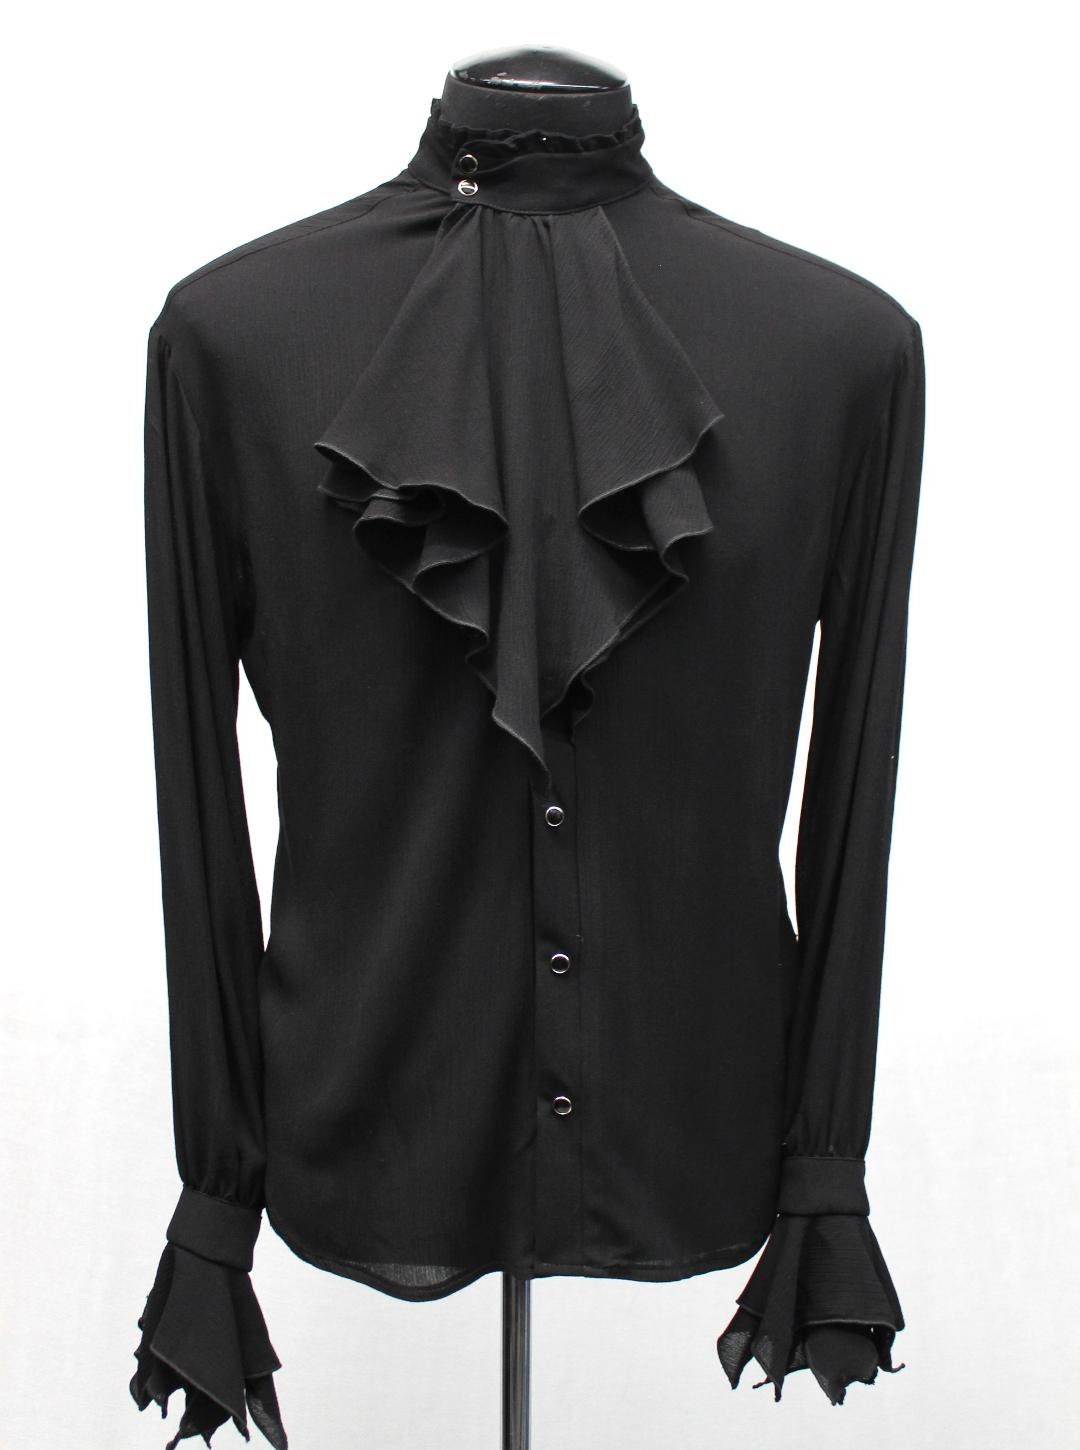 Shrine of Hollywood THE COUNT SHIRT - Black Rayon